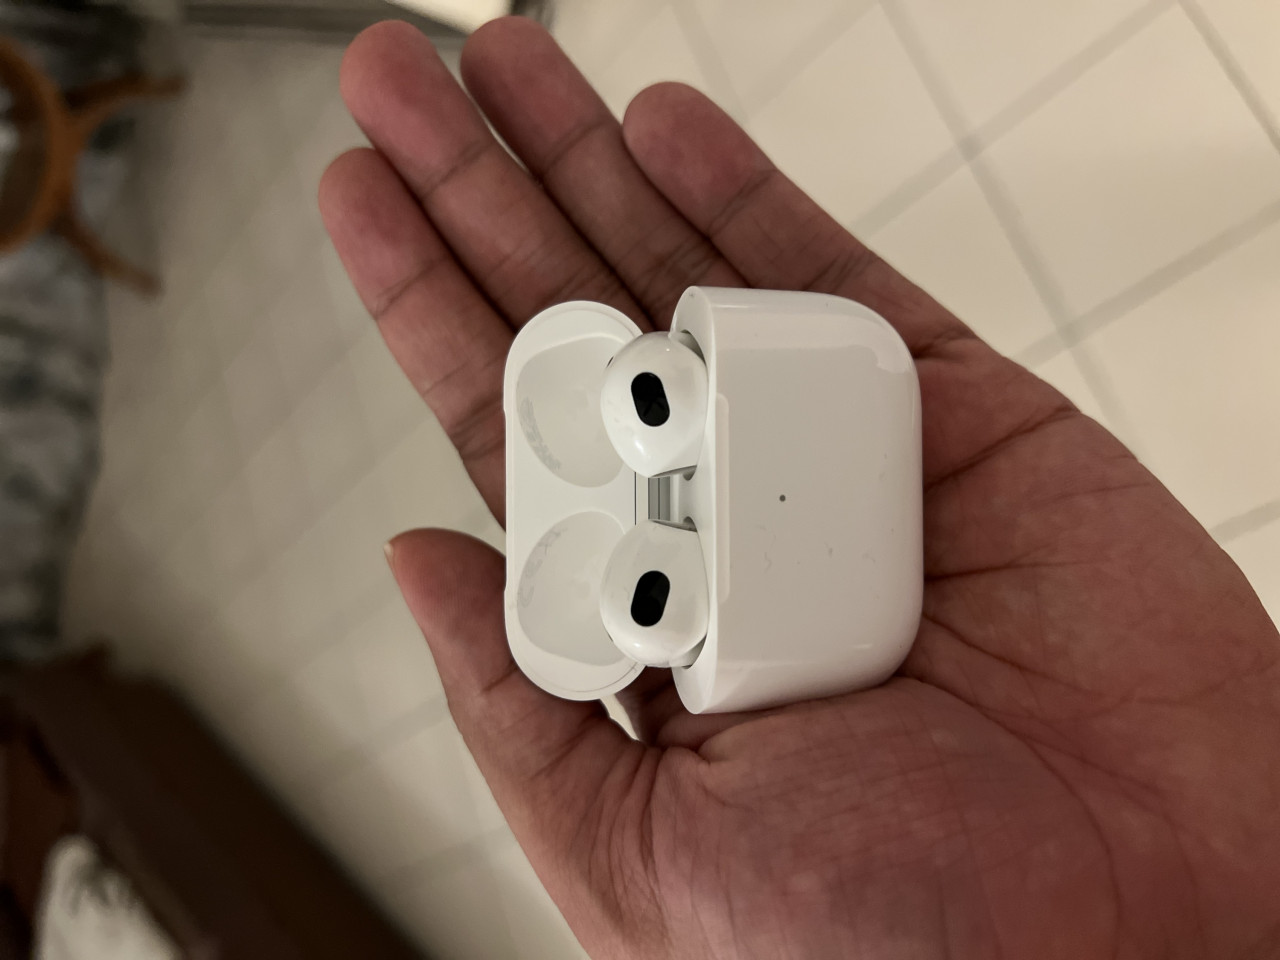 The AirPods case easily fits in the palm and is altogether quite flexible. – Haikal Fernandez pic